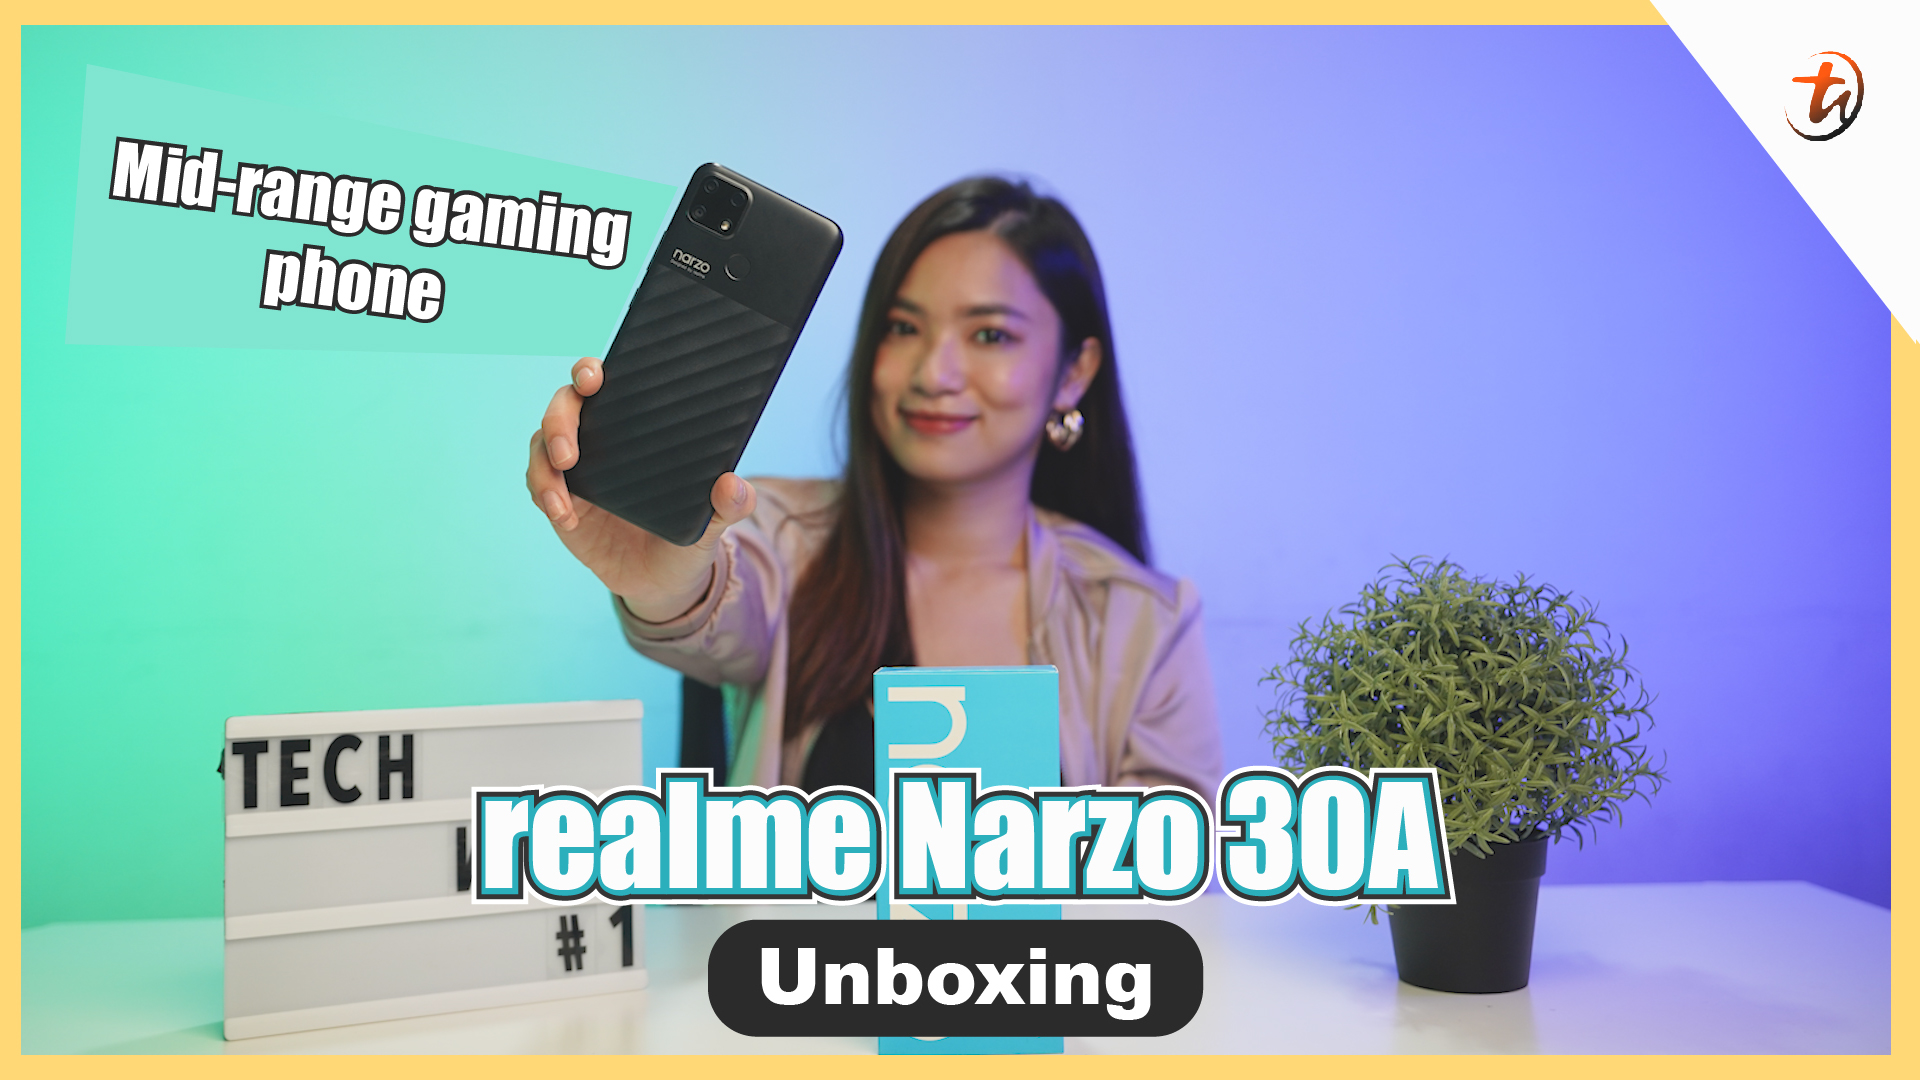 realme Narzo 30A - Mid-range gaming phone  | TechNave Unboxing and Hands-On Video